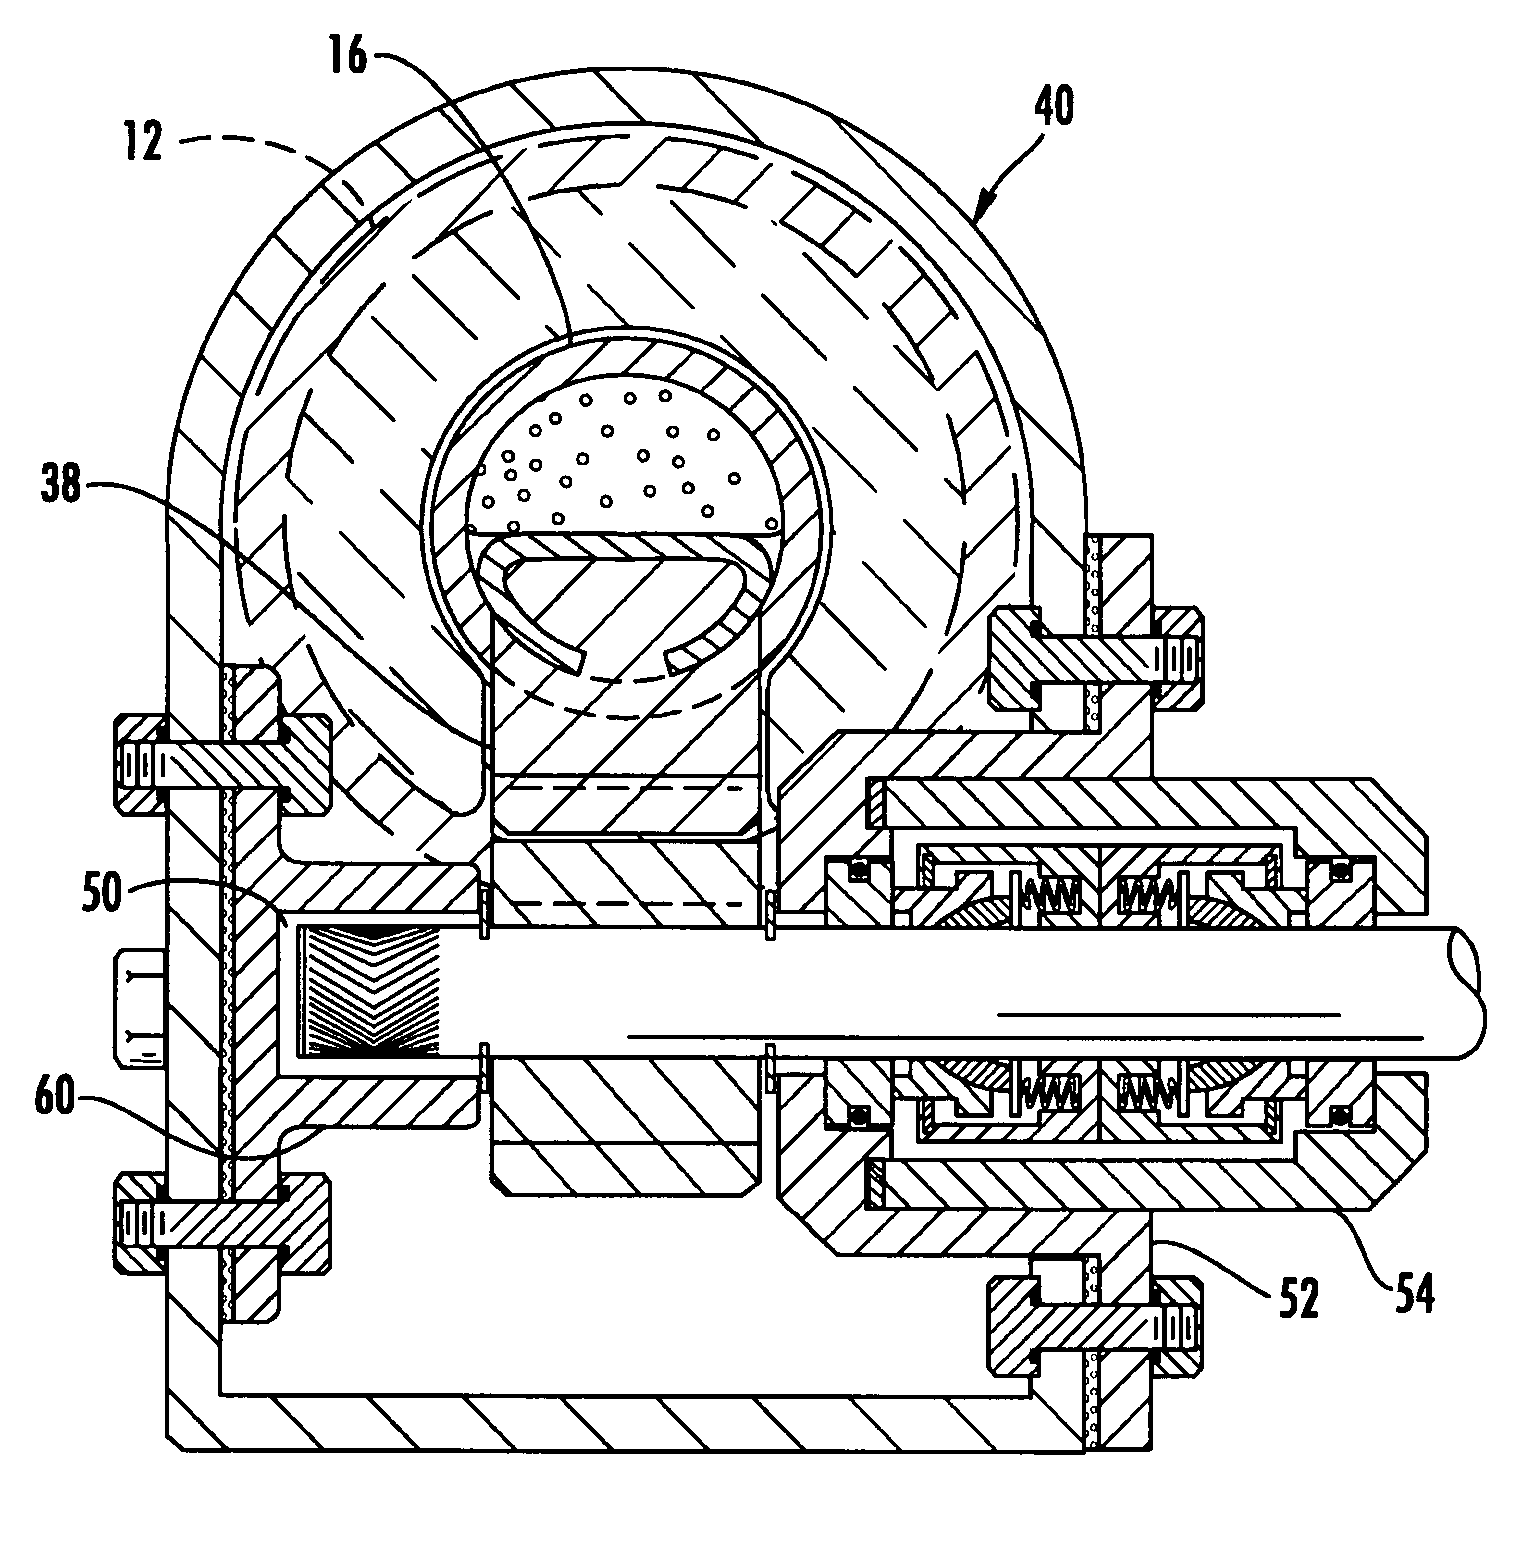 Ocean wave energy converter having an improved generator and ballast control